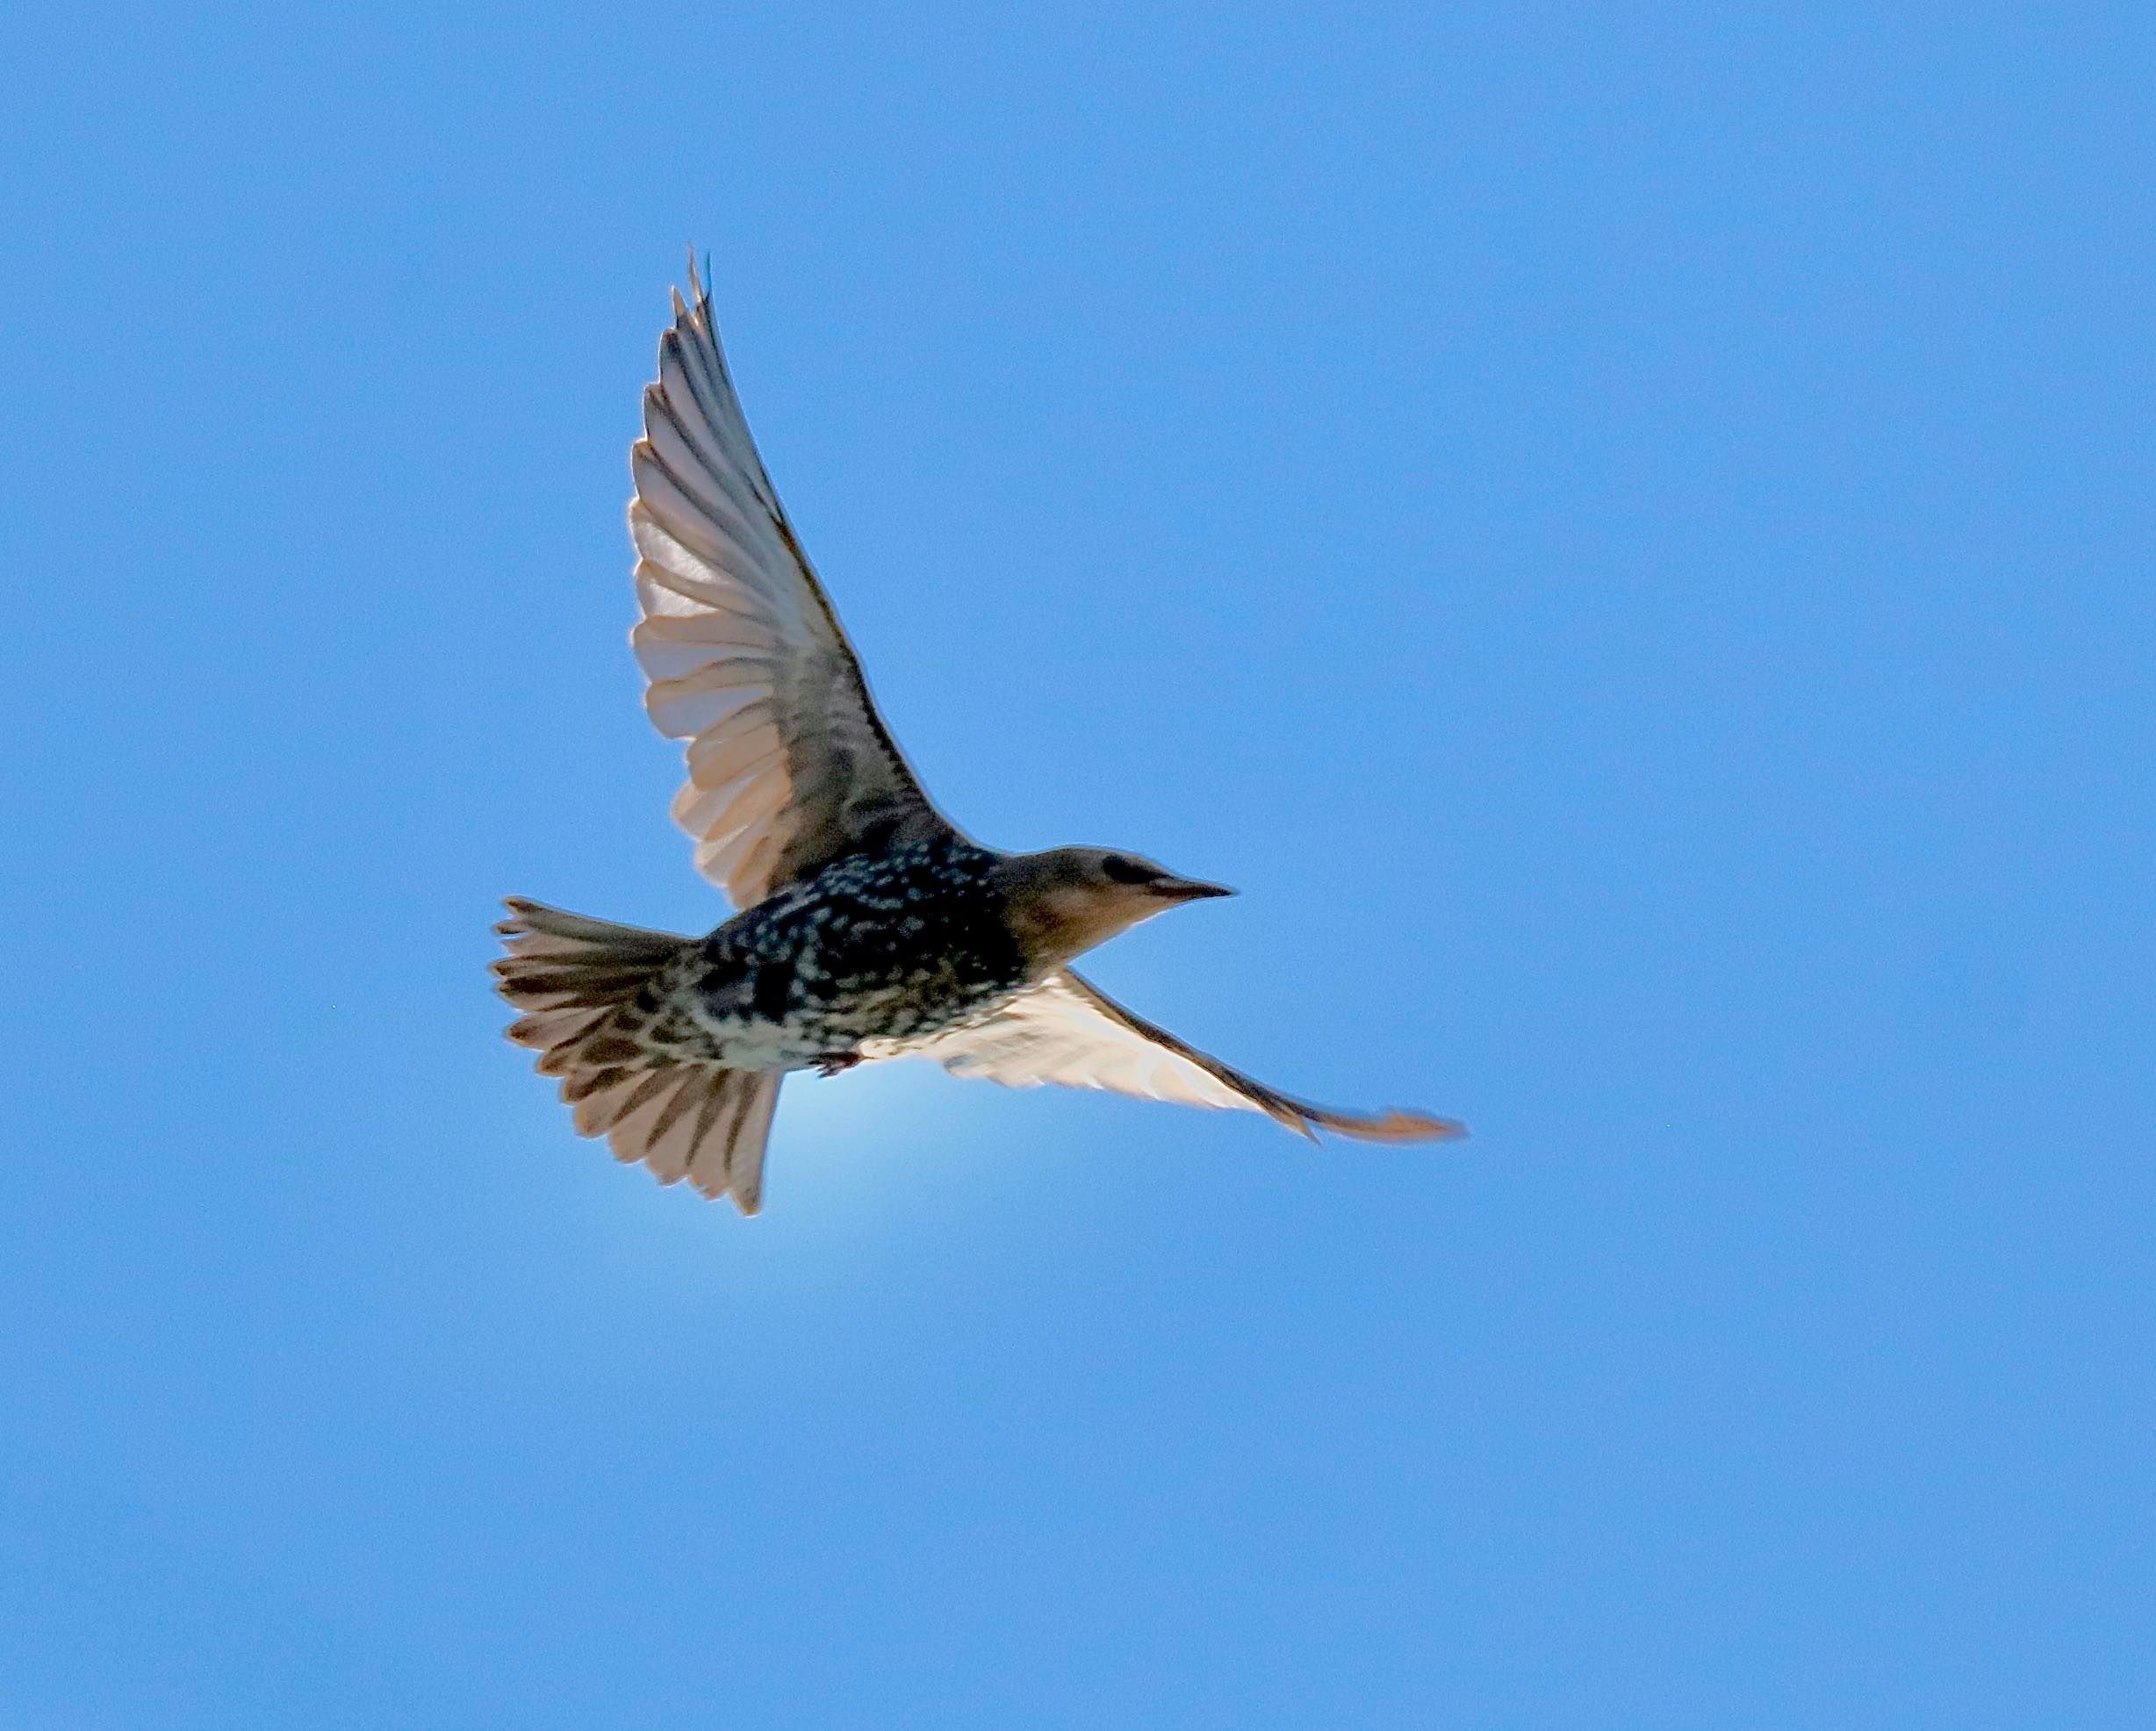 Starling in flight at wetlands, photo by Sunny September